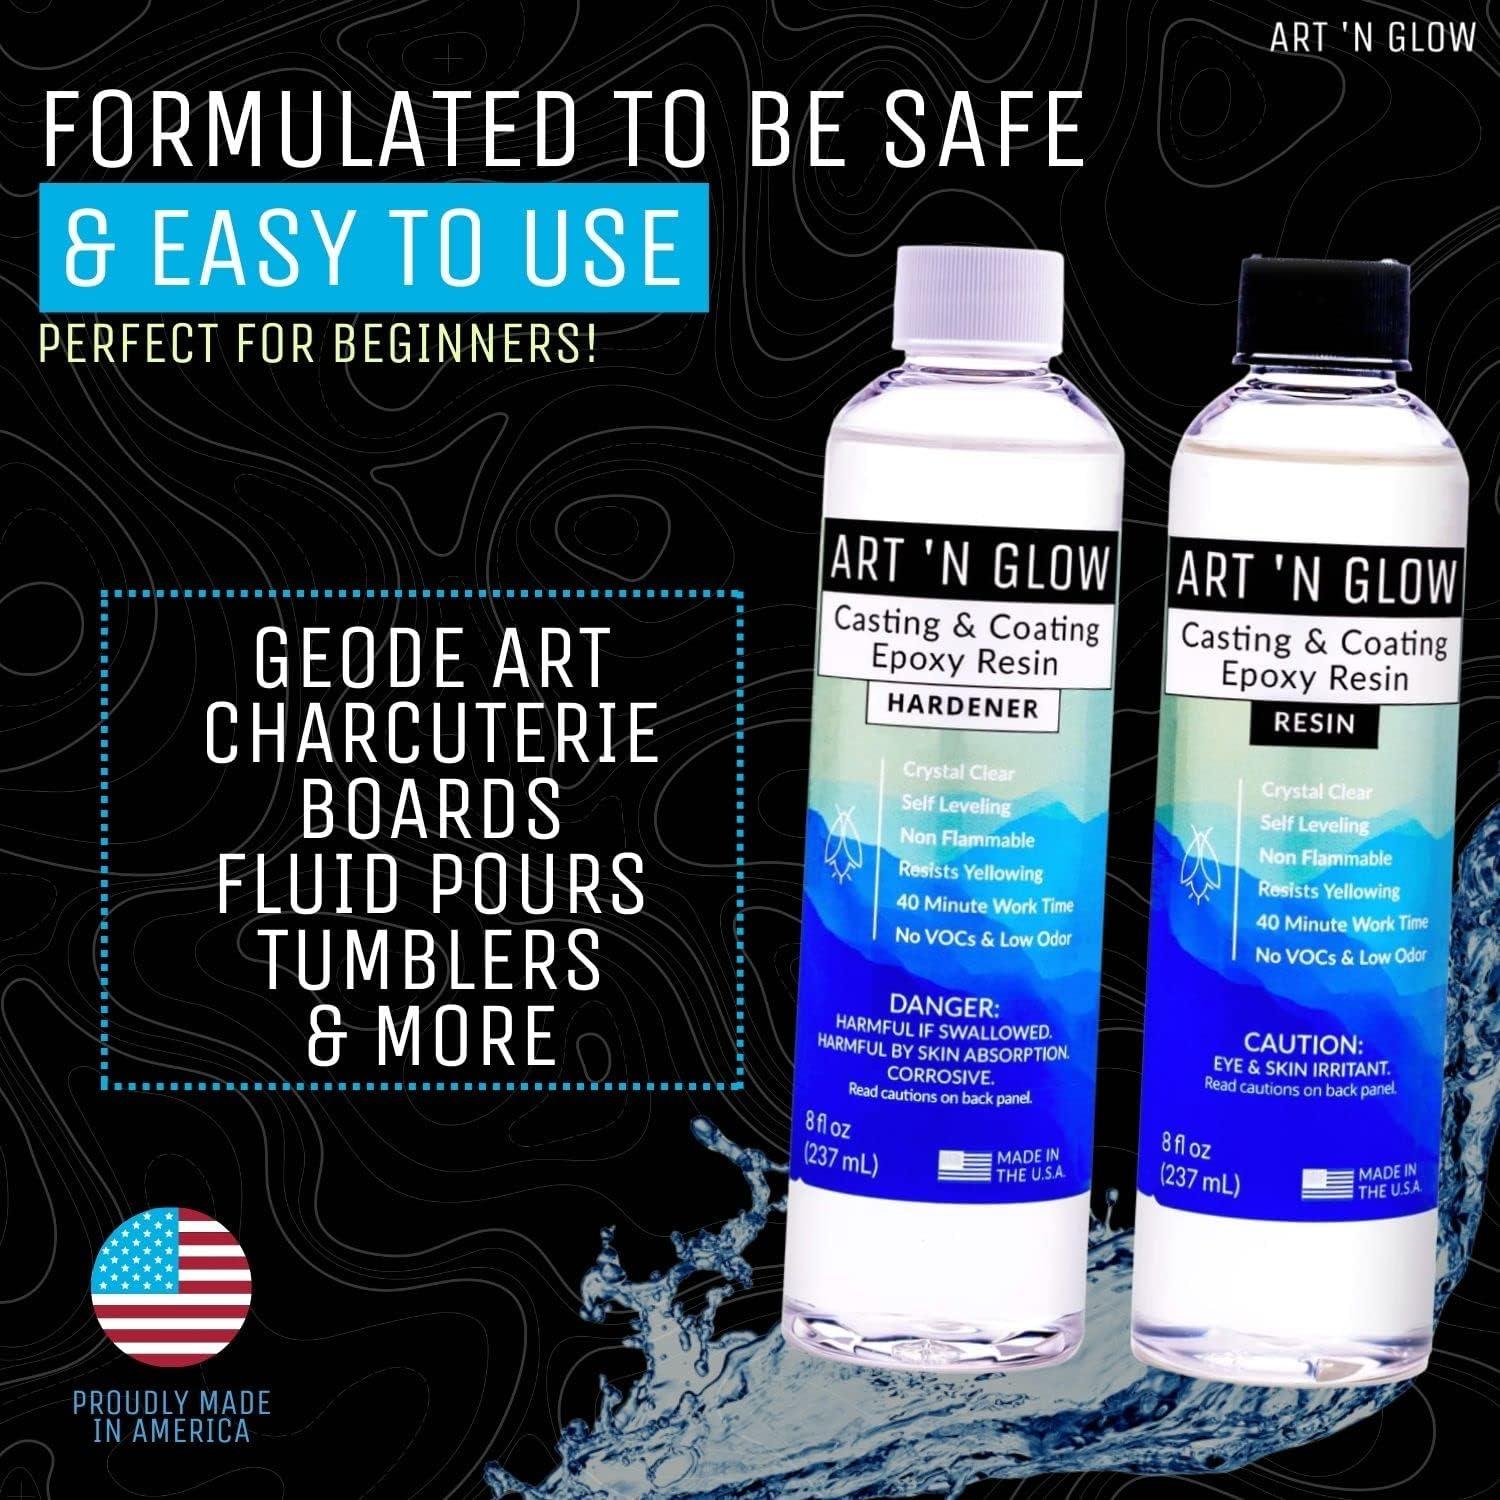 Clear Epoxy Resin Kit (48 oz): Free US Shipping – Industrial Clear